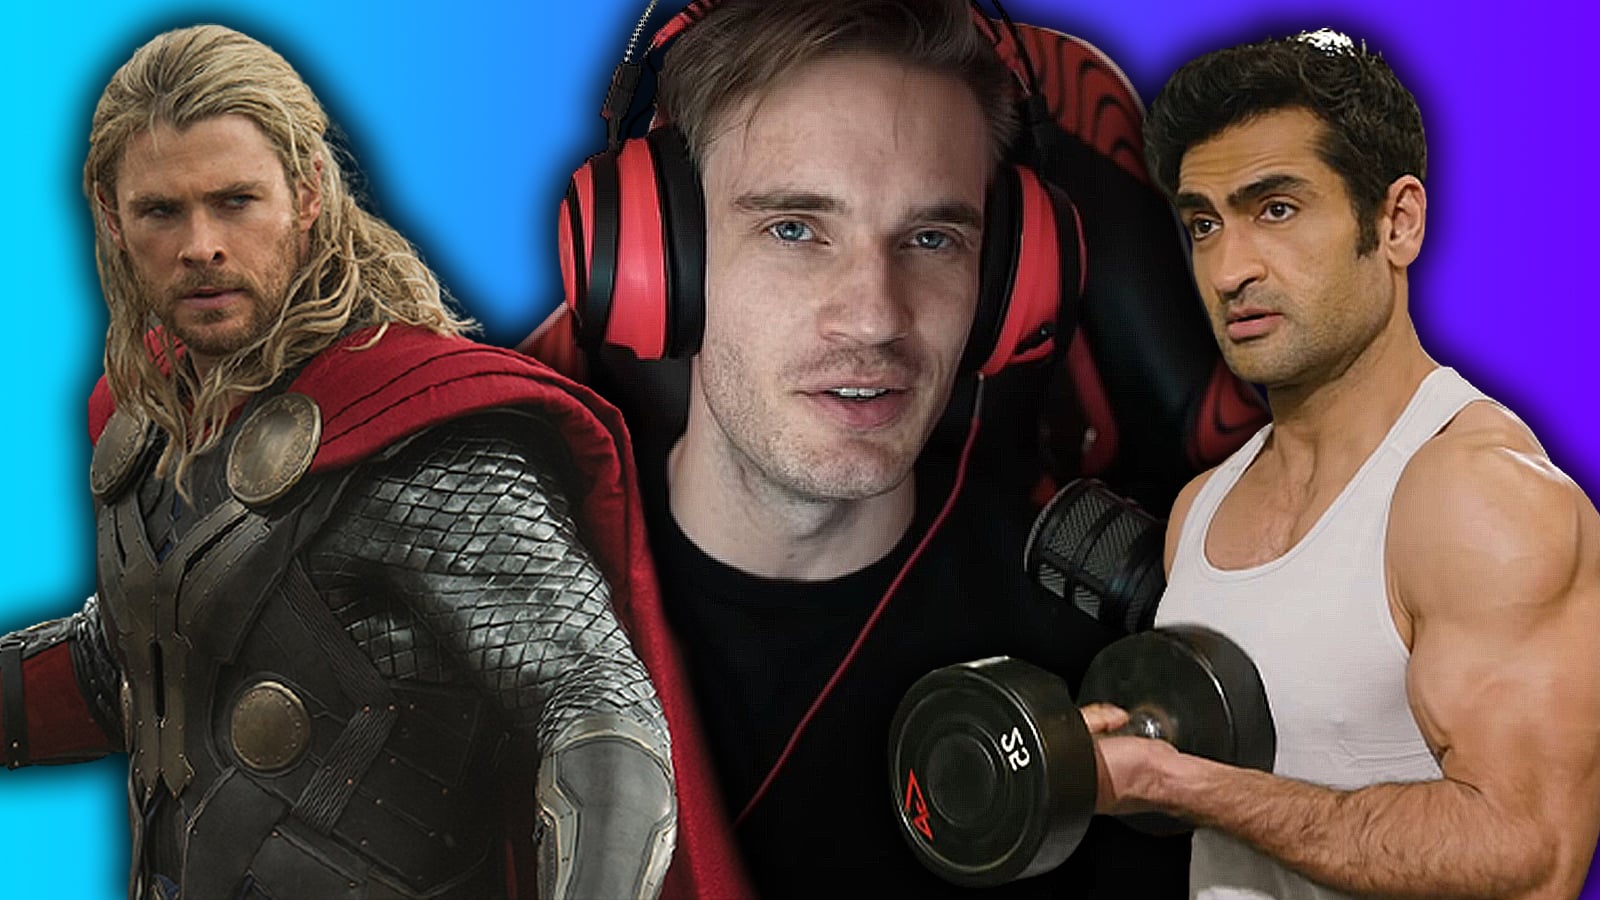 Pewdiepie Claims That Chris Hemsworth Uses Steroids